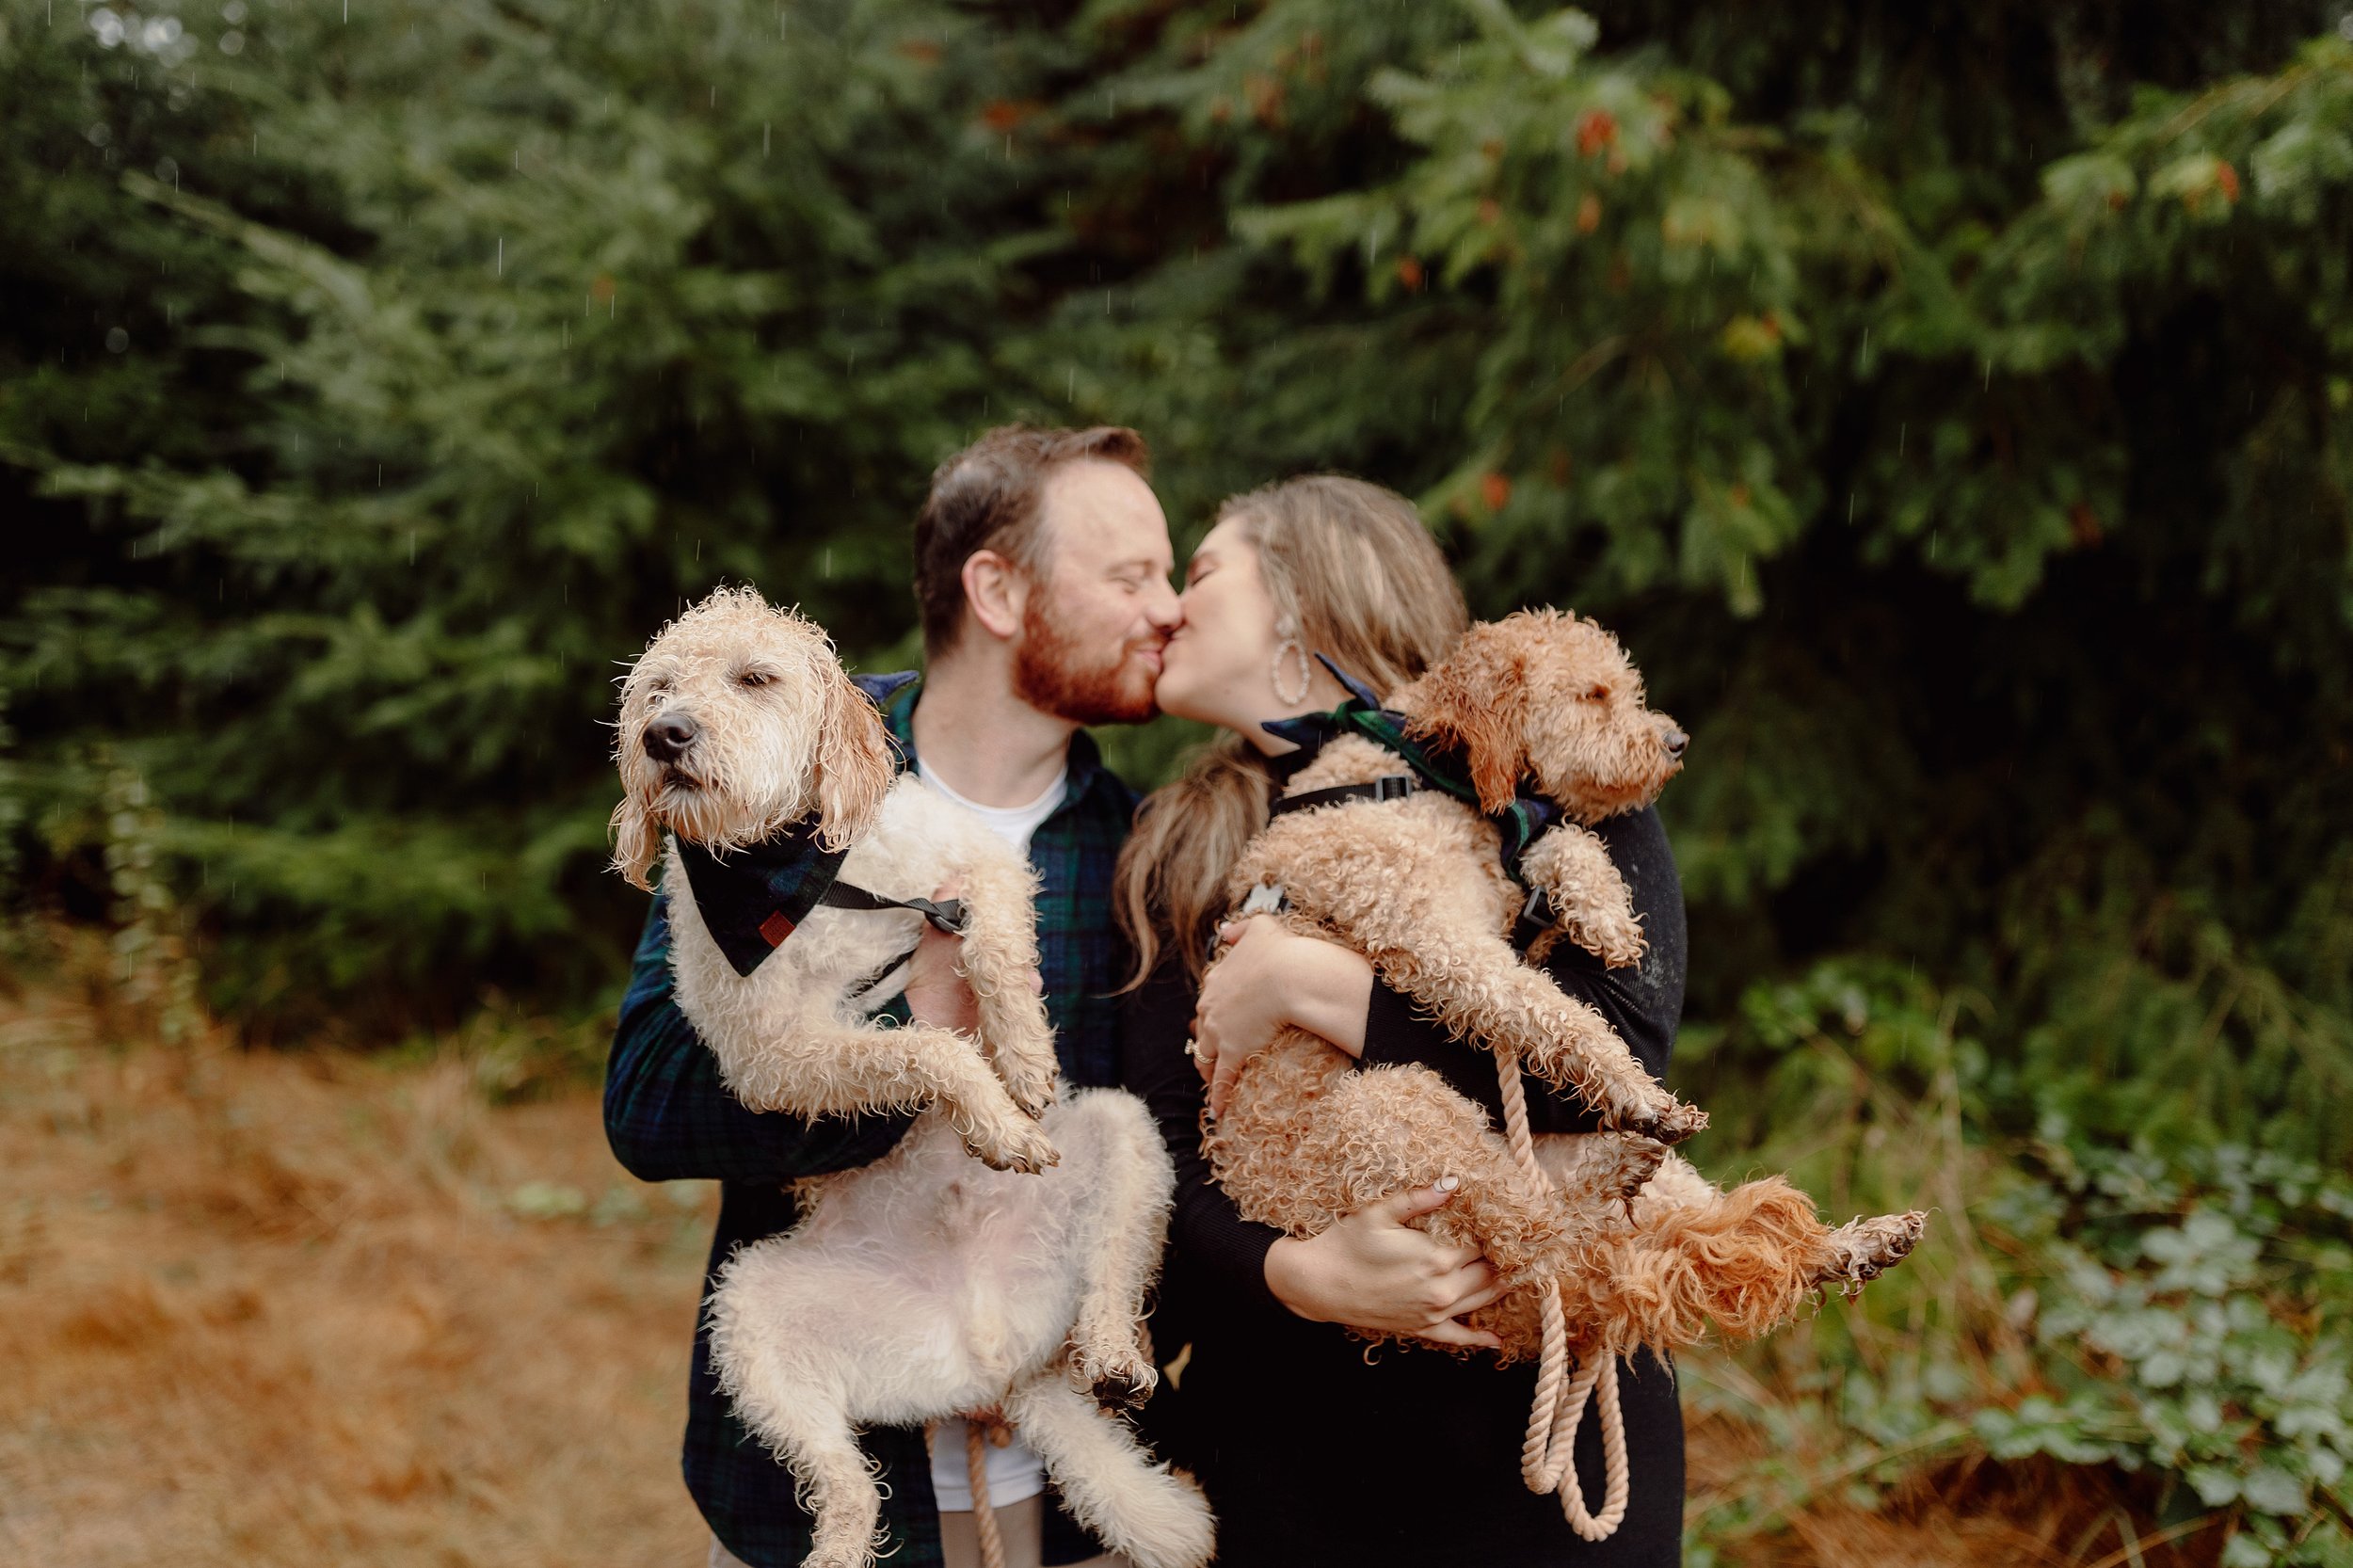 seattle_dog_puppy_maternity_session_newborn_photography_baby_home_lifestyle_fresh_48_session_pnw_0106.jpg